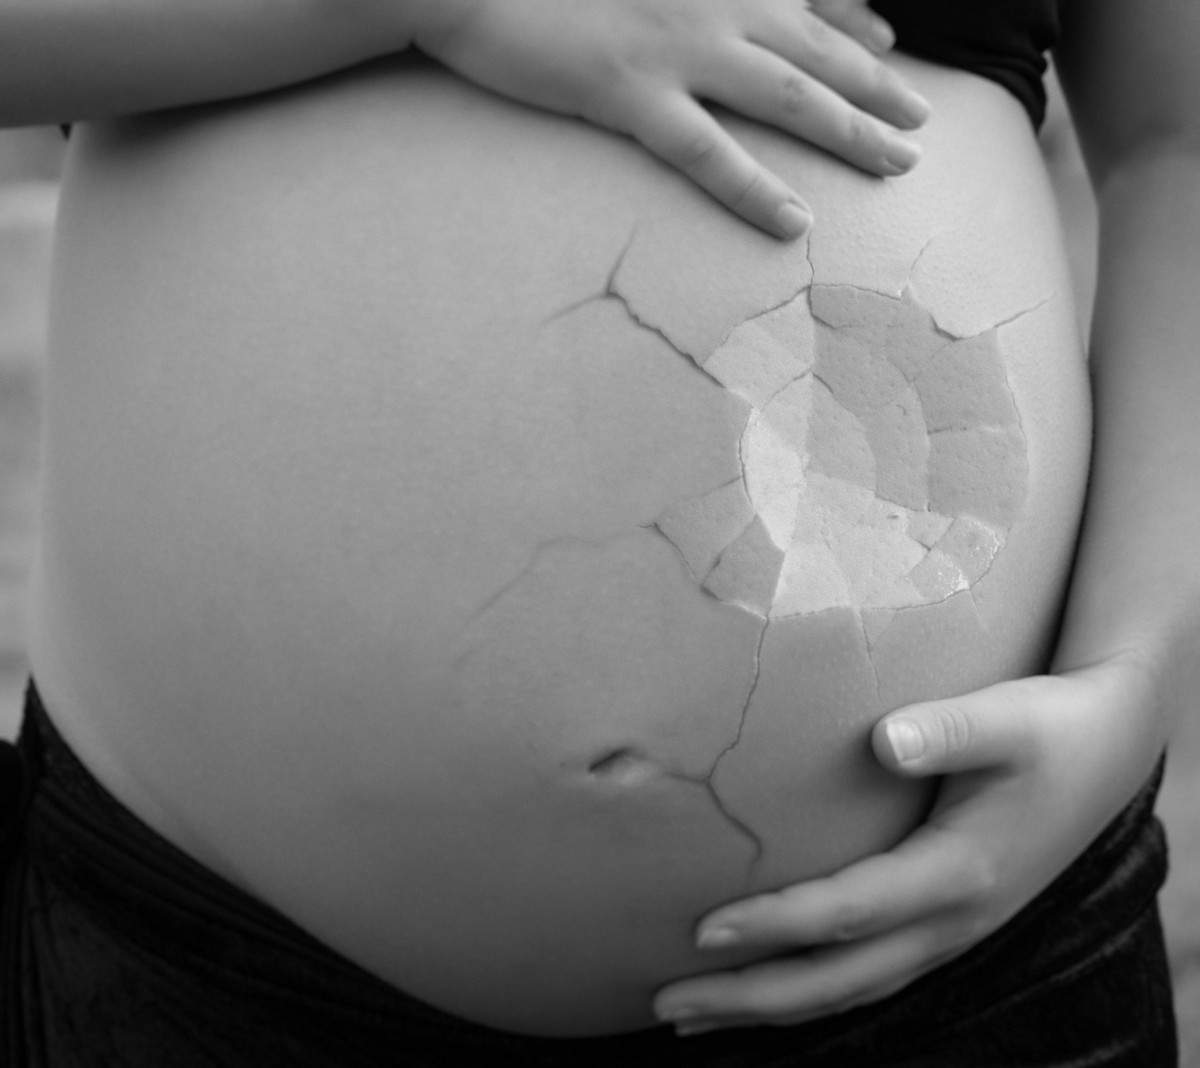 Eggs and Pregnancy: The Pros and Cons